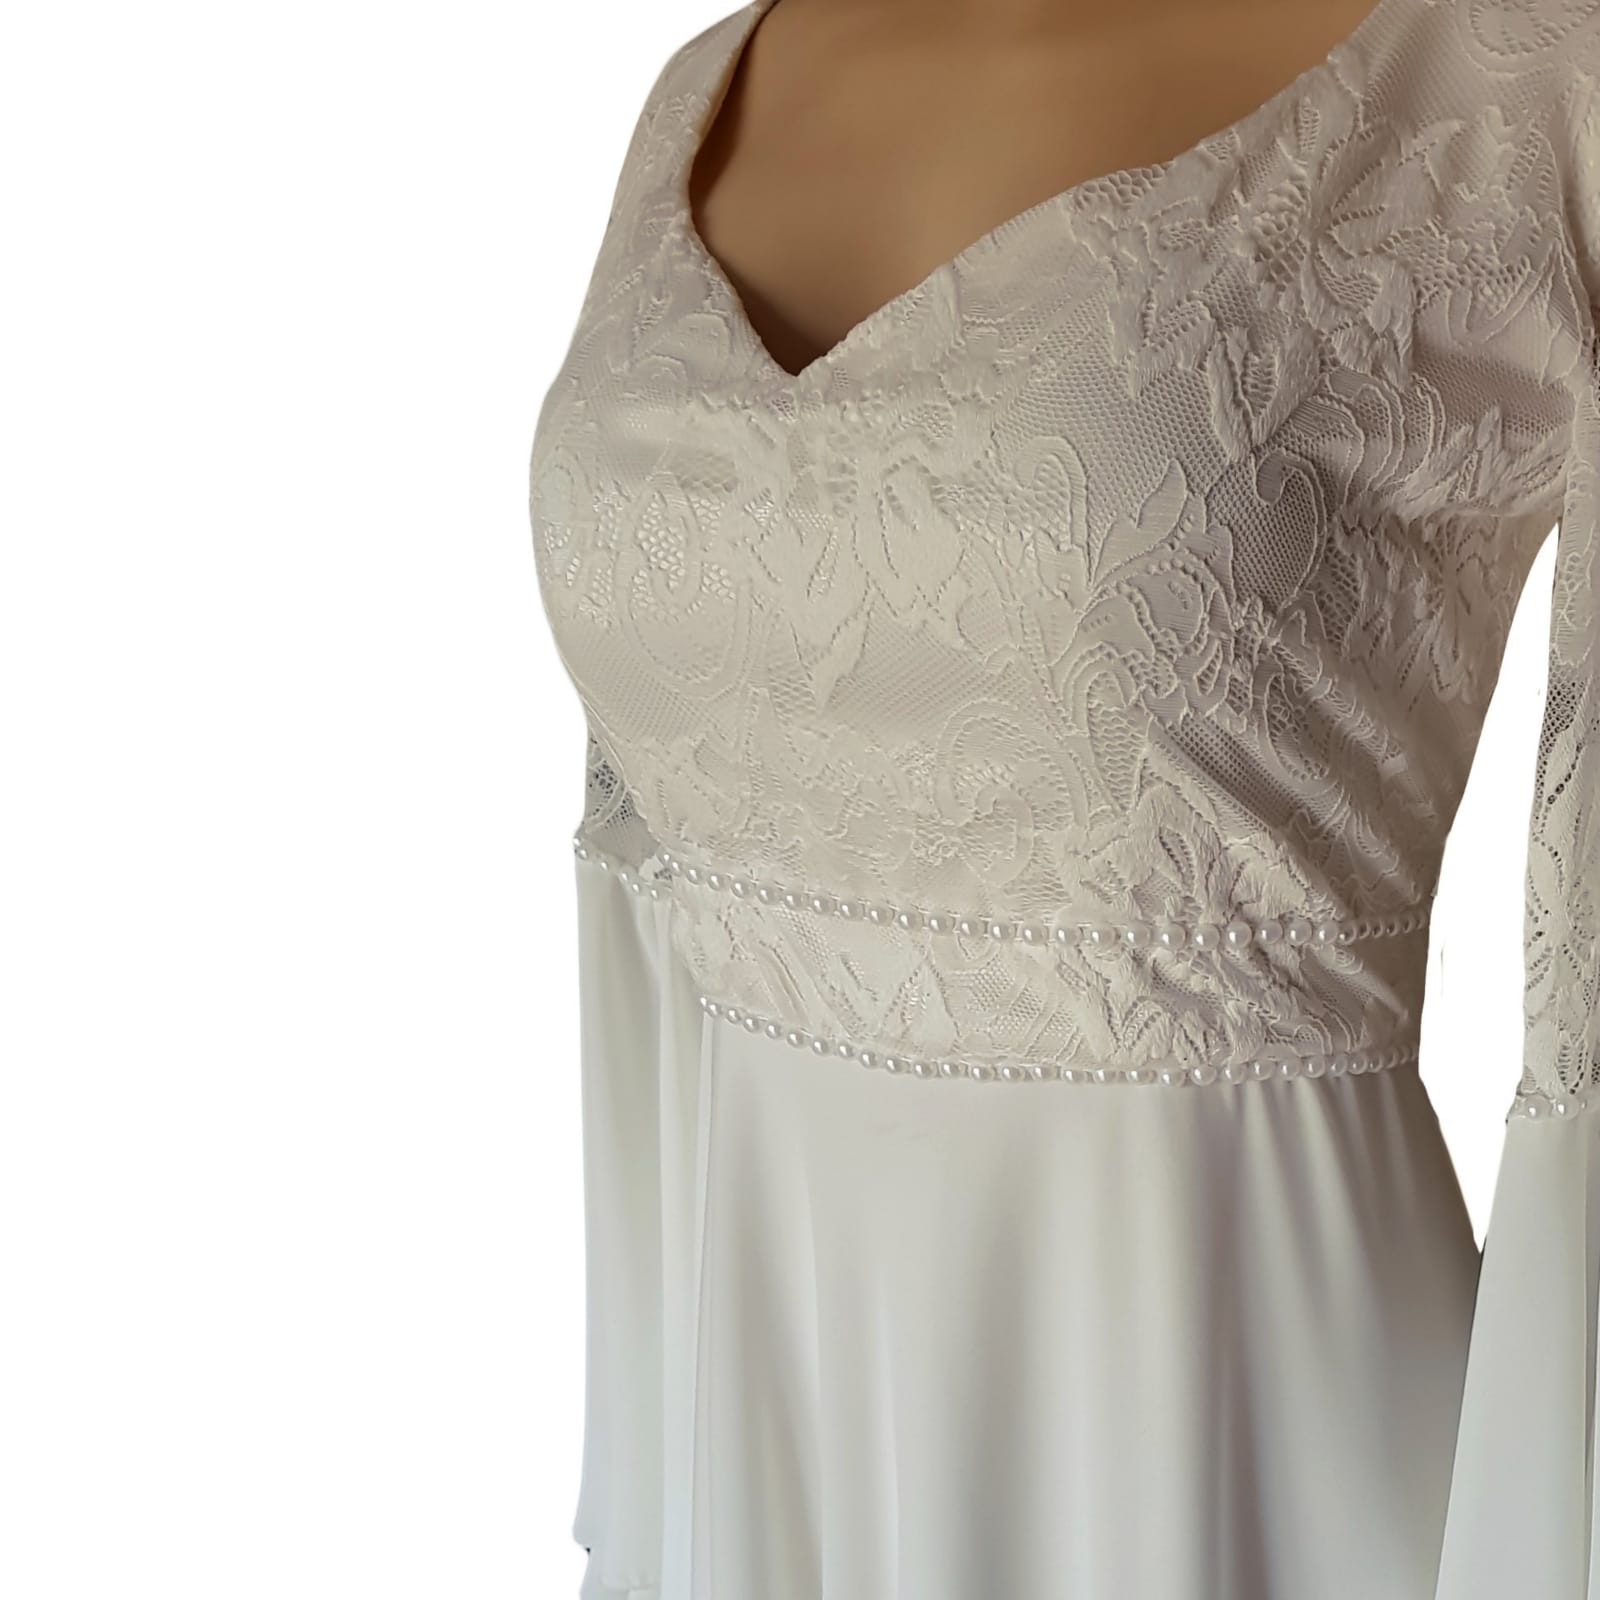 White flowy lace bodice wedding dress 8 white flowy lace bodice wedding dress. With bell sleeve and train. Sleeve and belt detailed with pearls. Stunnning wedding dress awesome for a beach wedding.